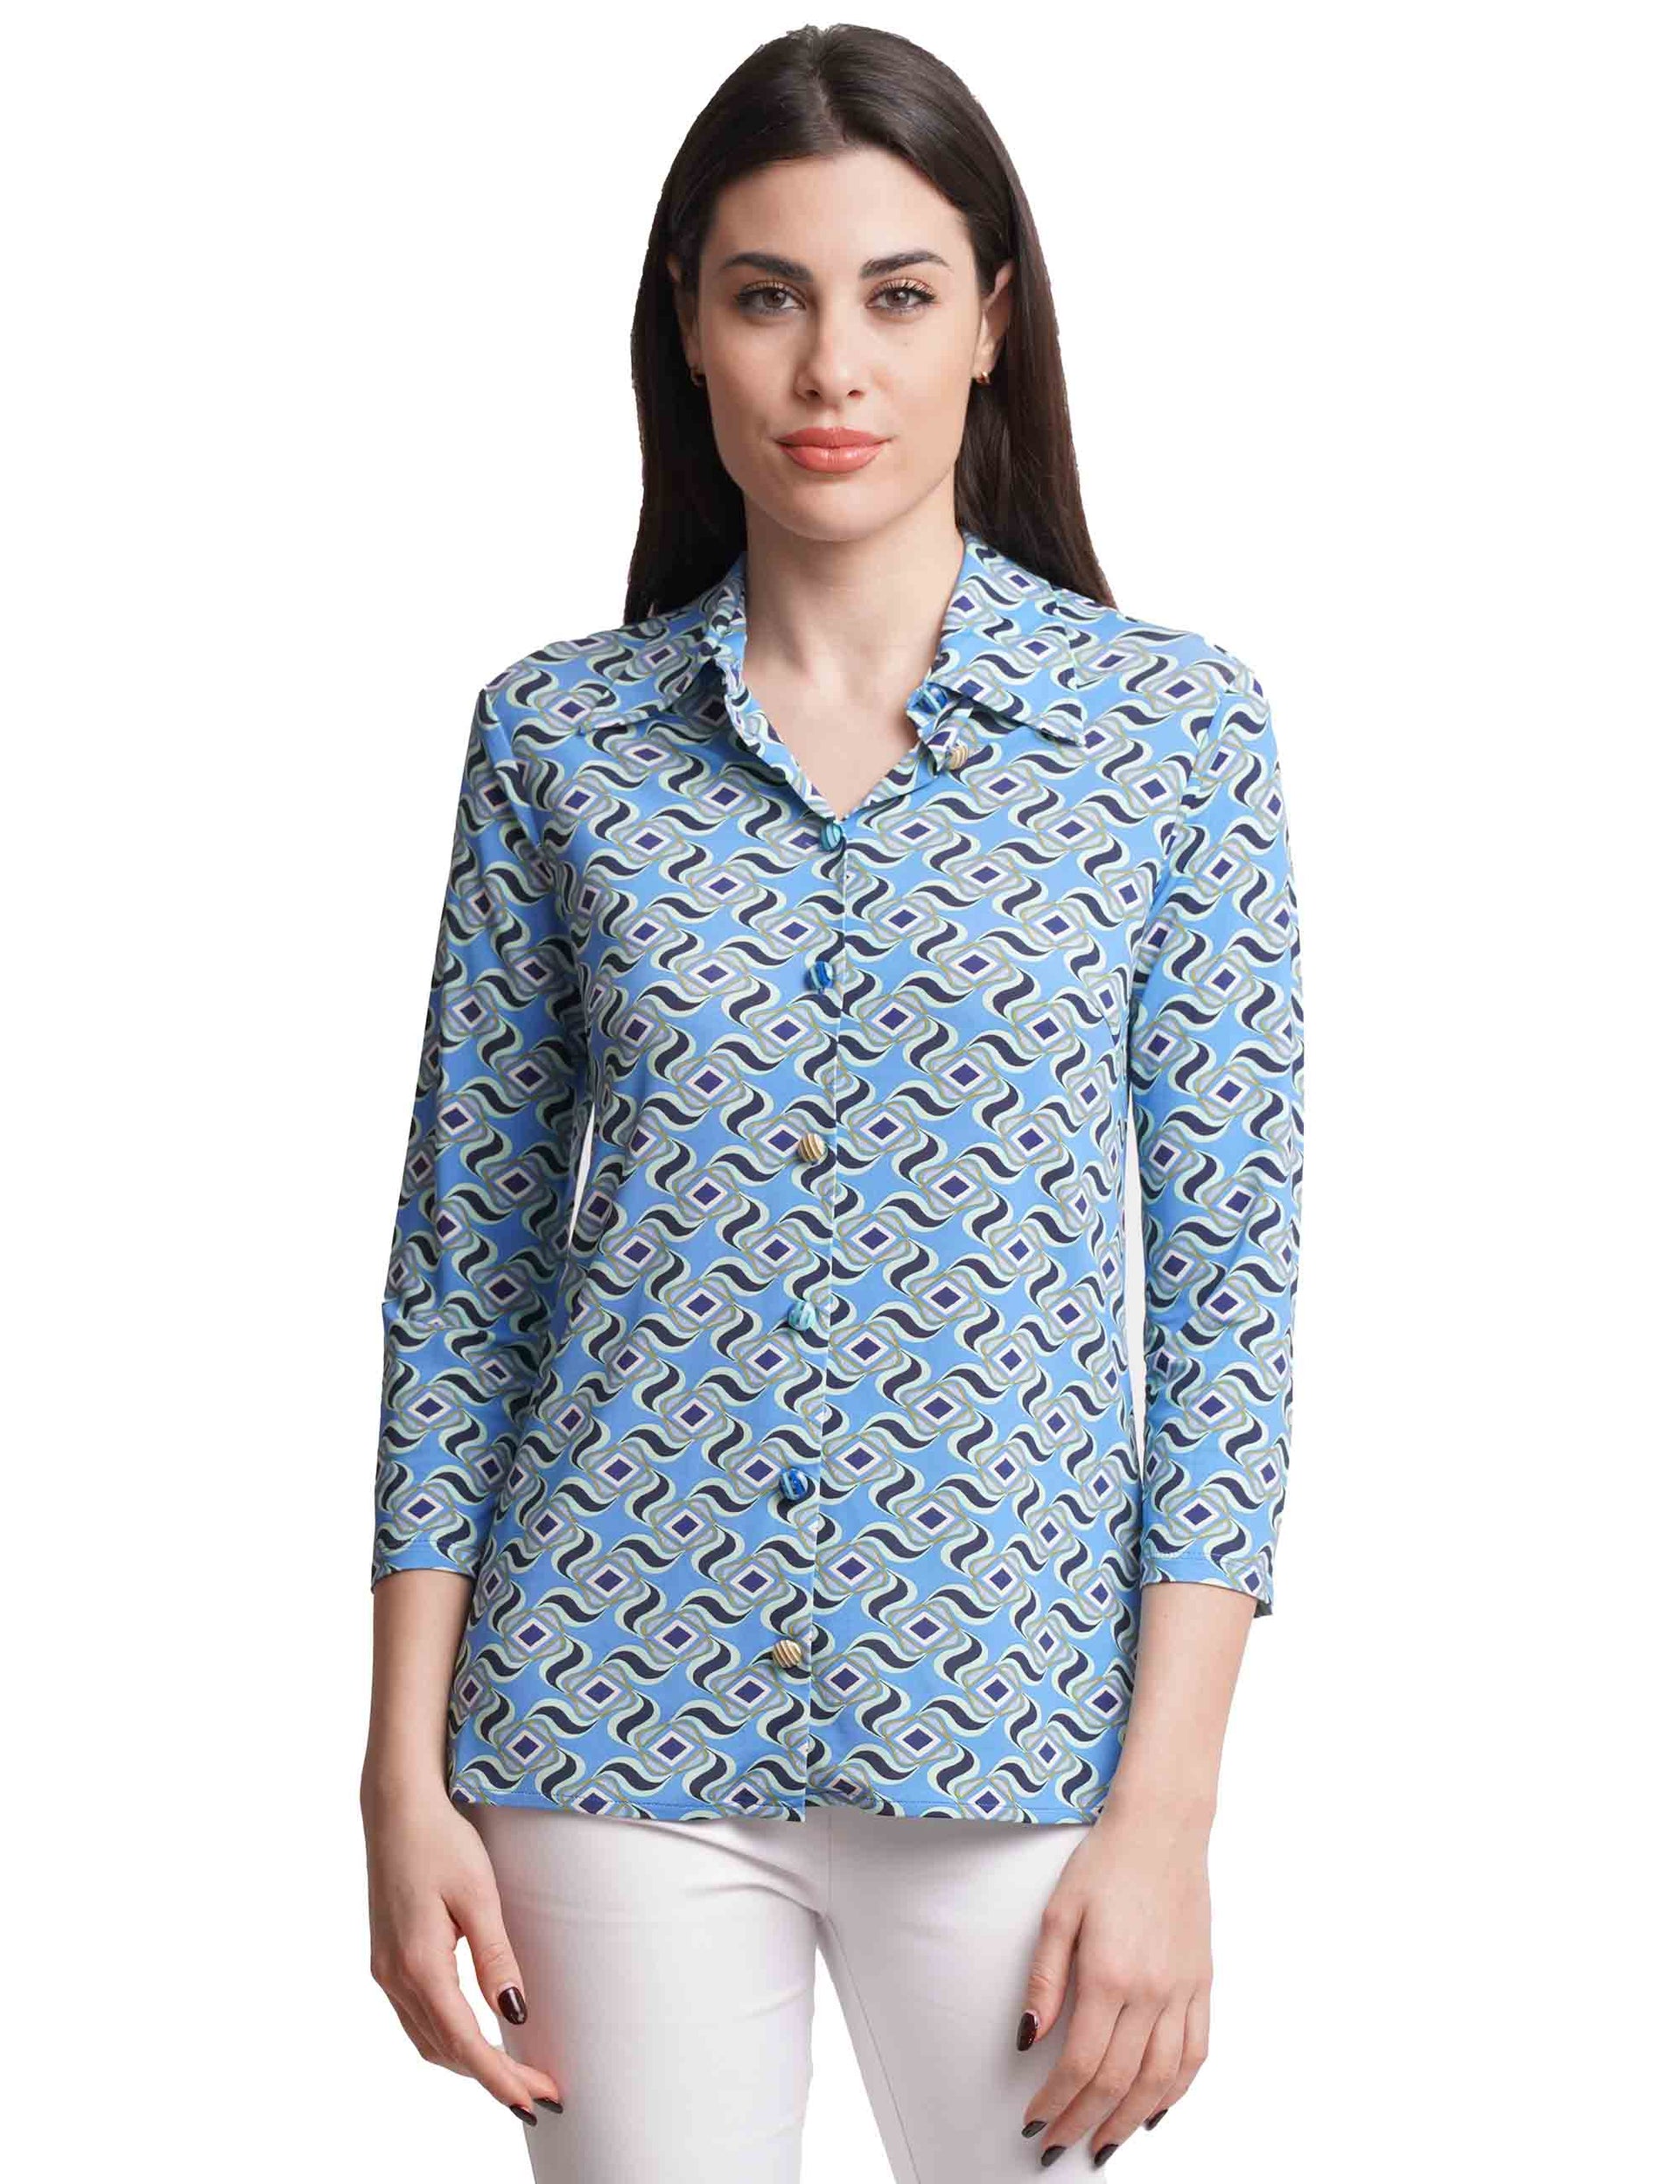 Swirl Print women's shirts in light blue jersey with 3/4 sleeves